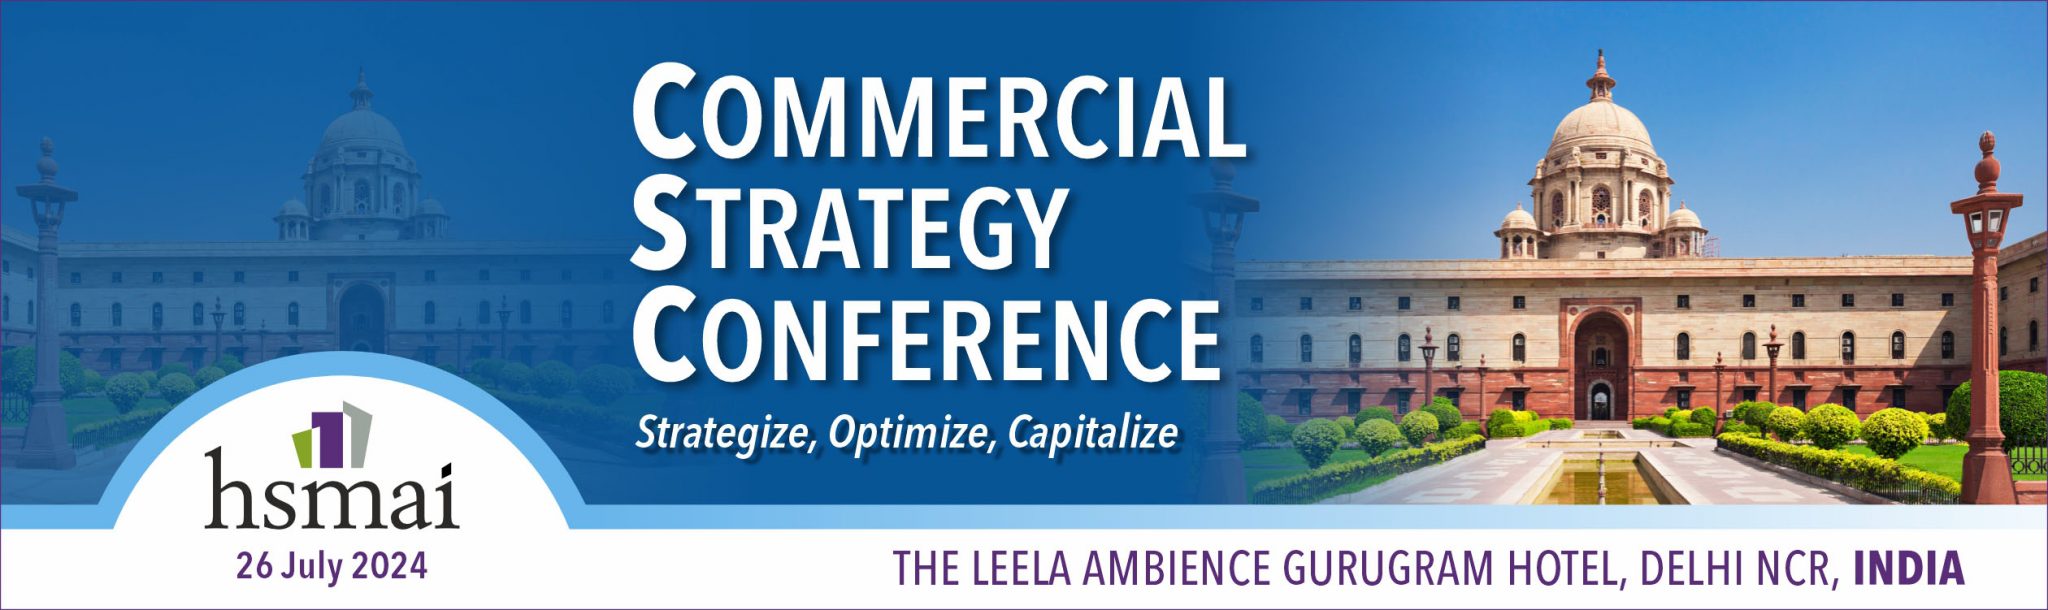 HSMAI Commercial Strategy Conference 2024 – India: Downloads